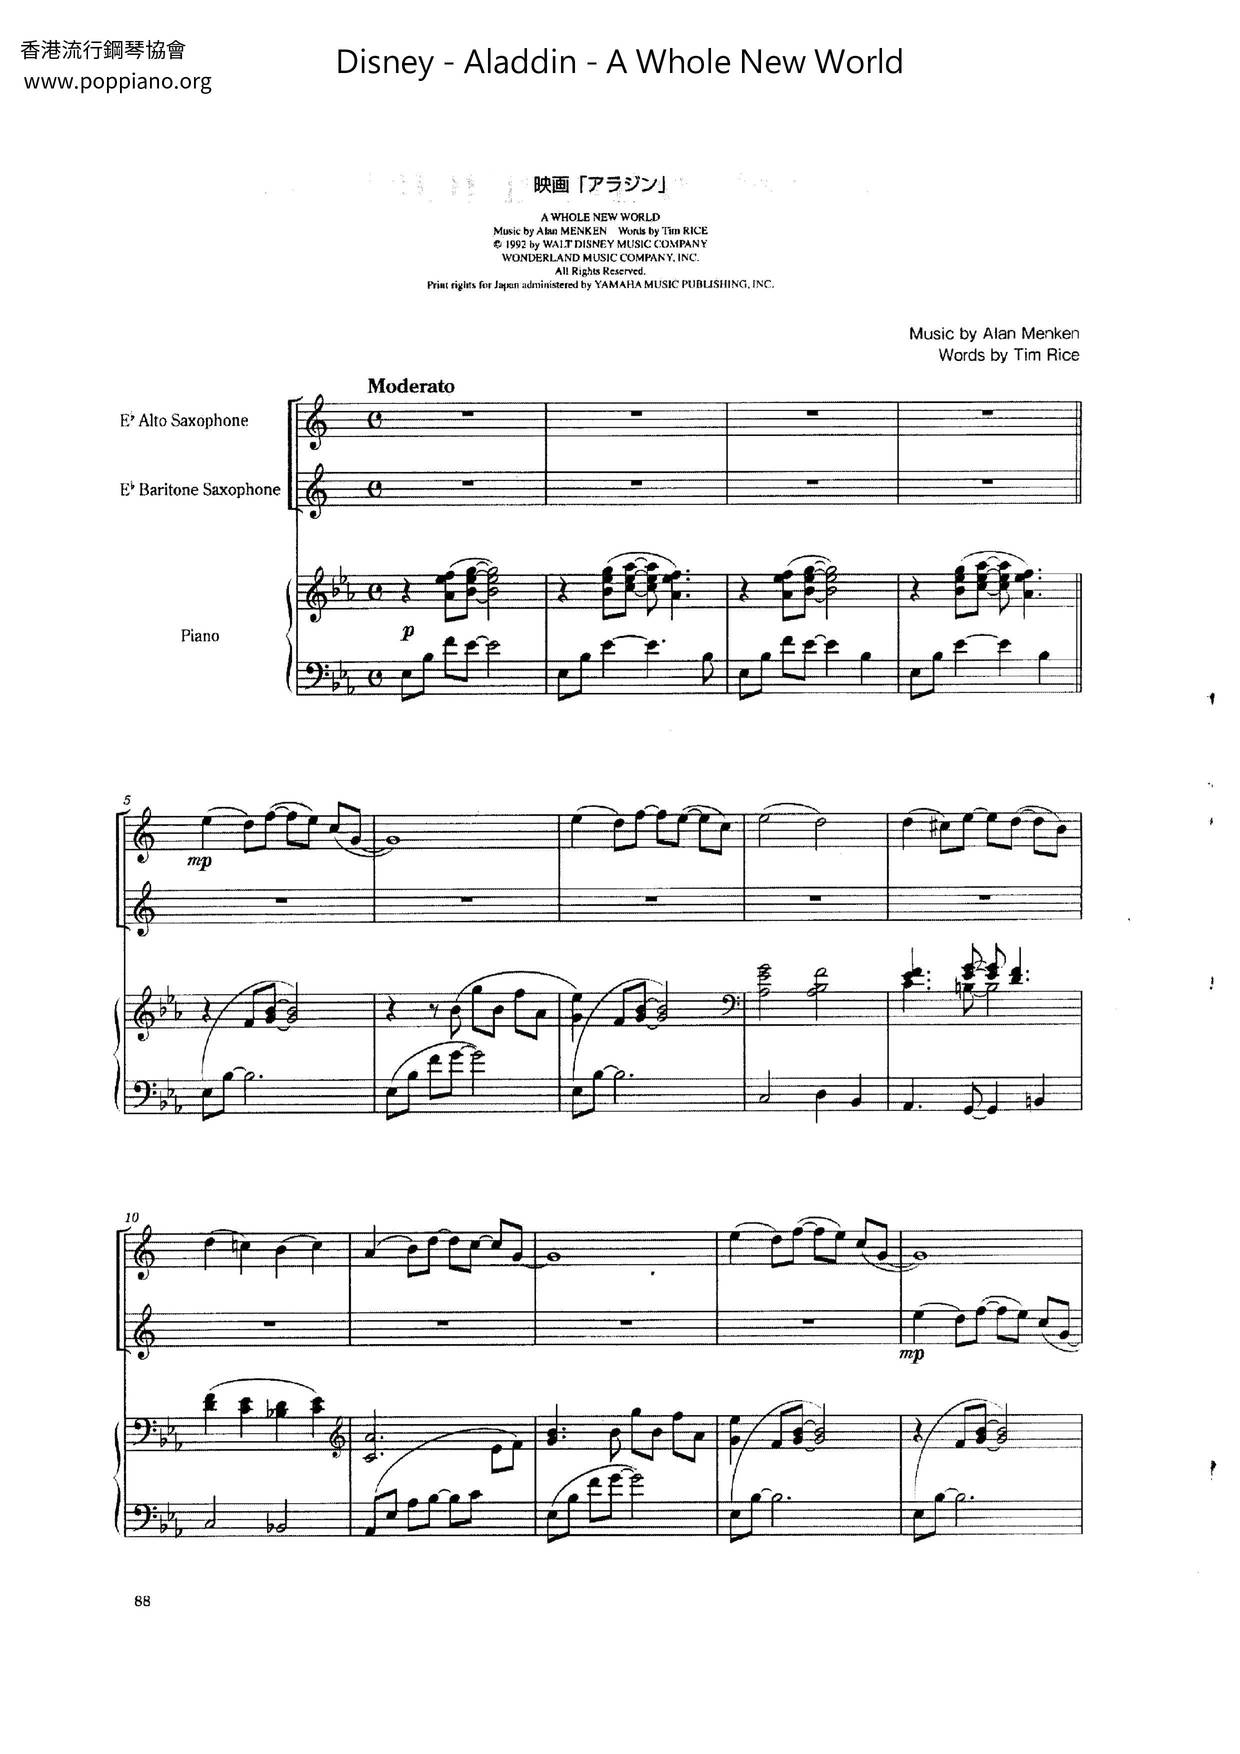 Movie Soundtrack A Whole New World End Title From Aladdin Sheet Music Pdf ア ホール ニュー ワールド 楽譜 Free Score Download